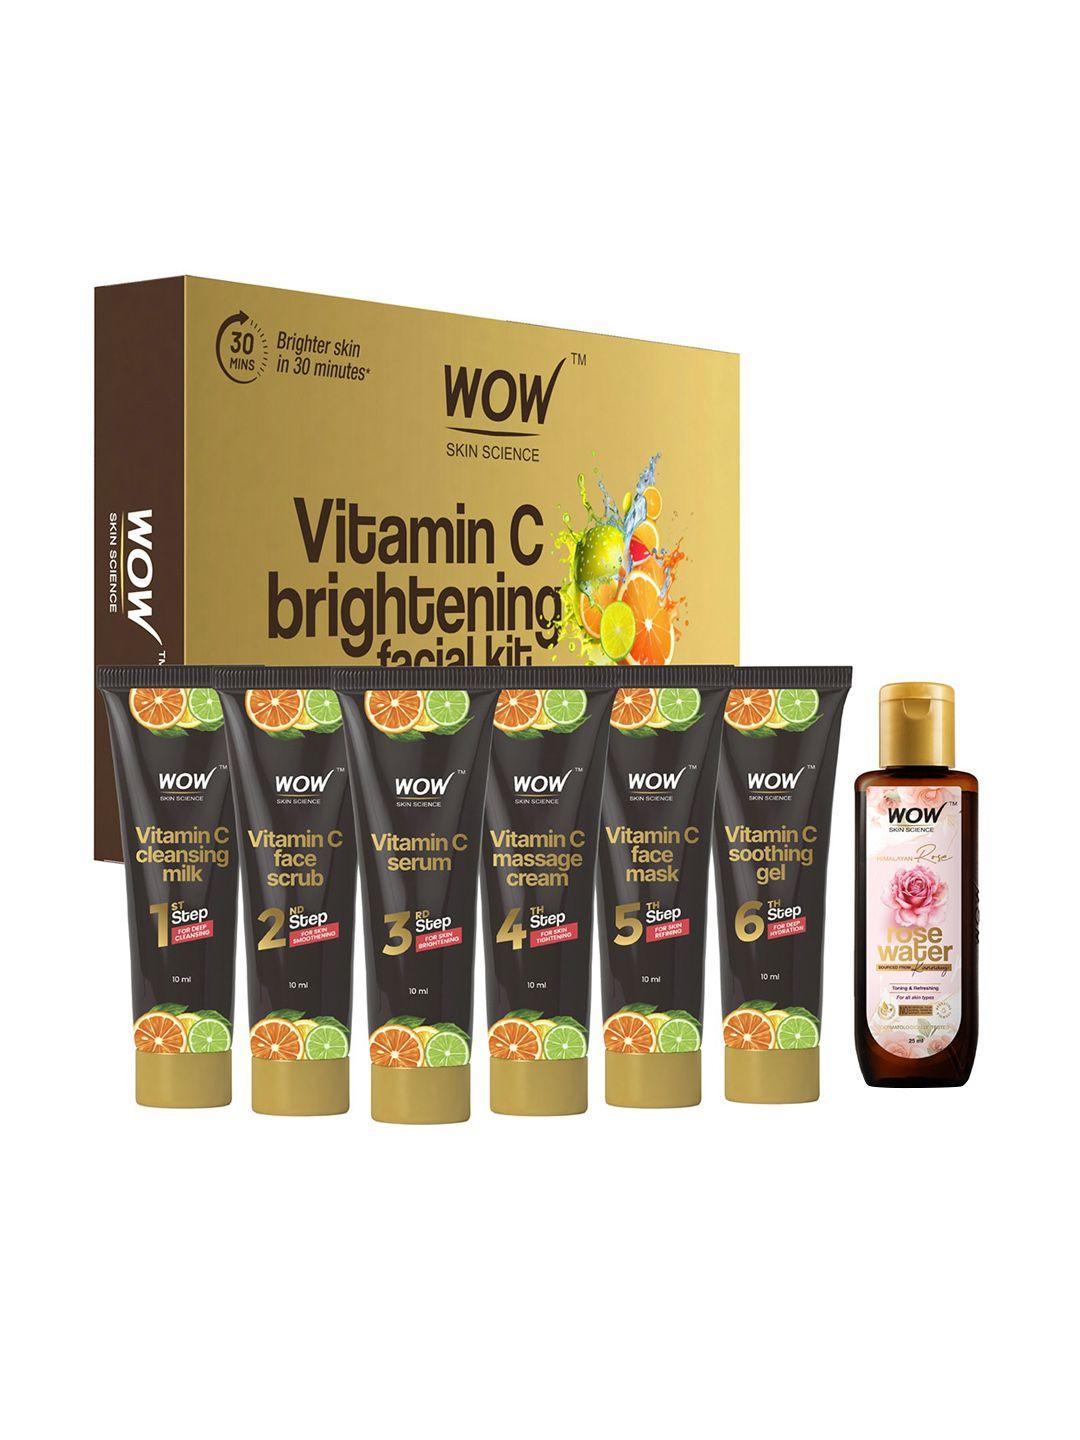 wow skin science vitamin c brightening facial kit with free rose water